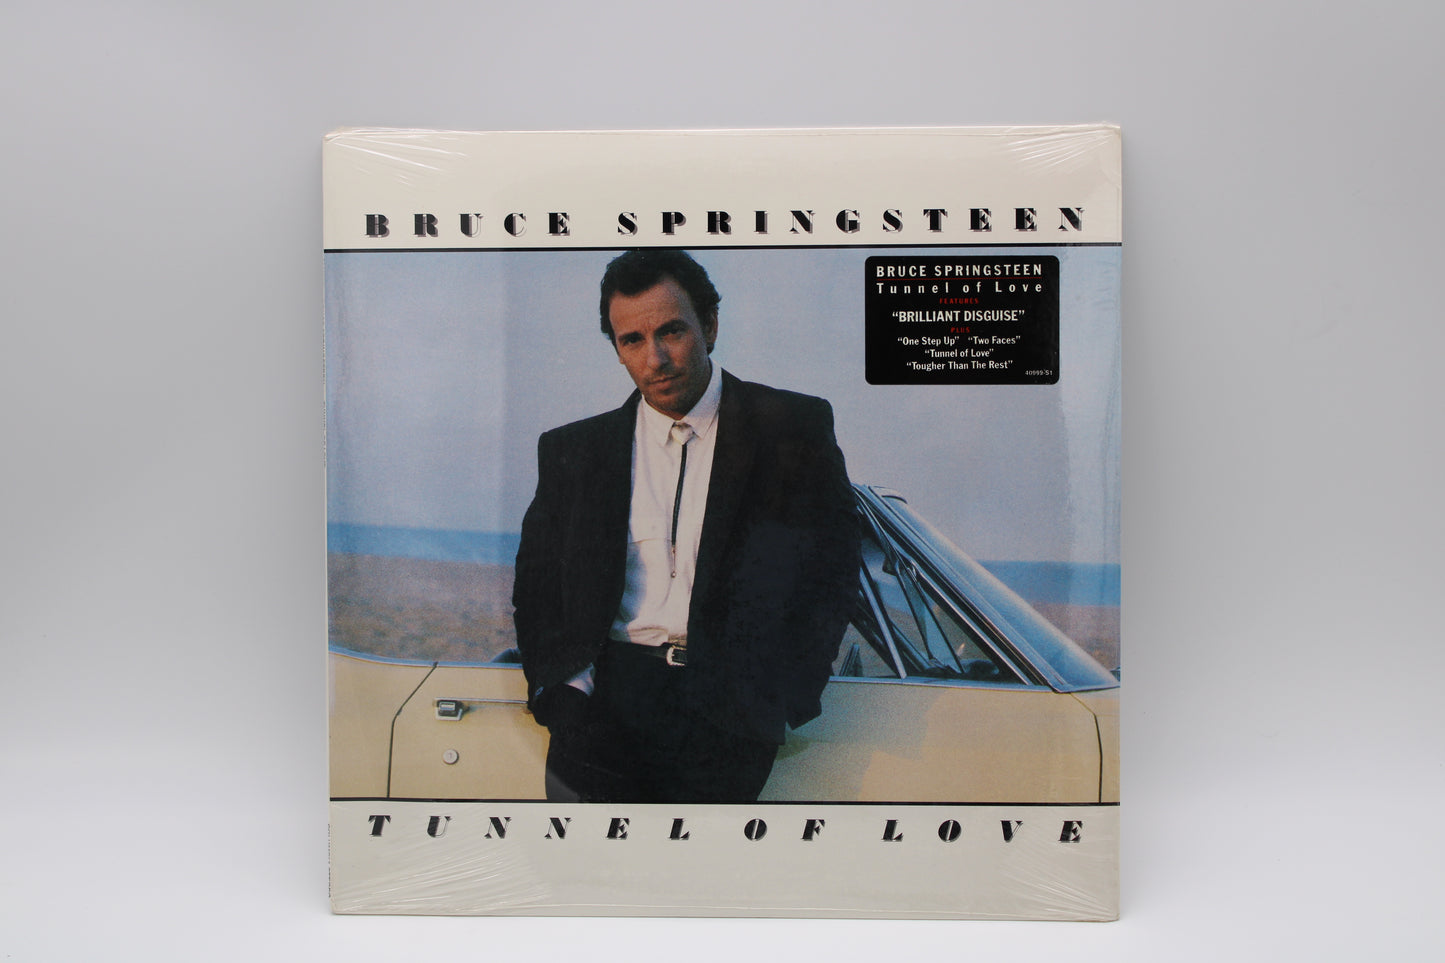 Bruce Springsteen Tunnel of Love 1987 Vinyl 12" Album with Hype Sticker and Sealed